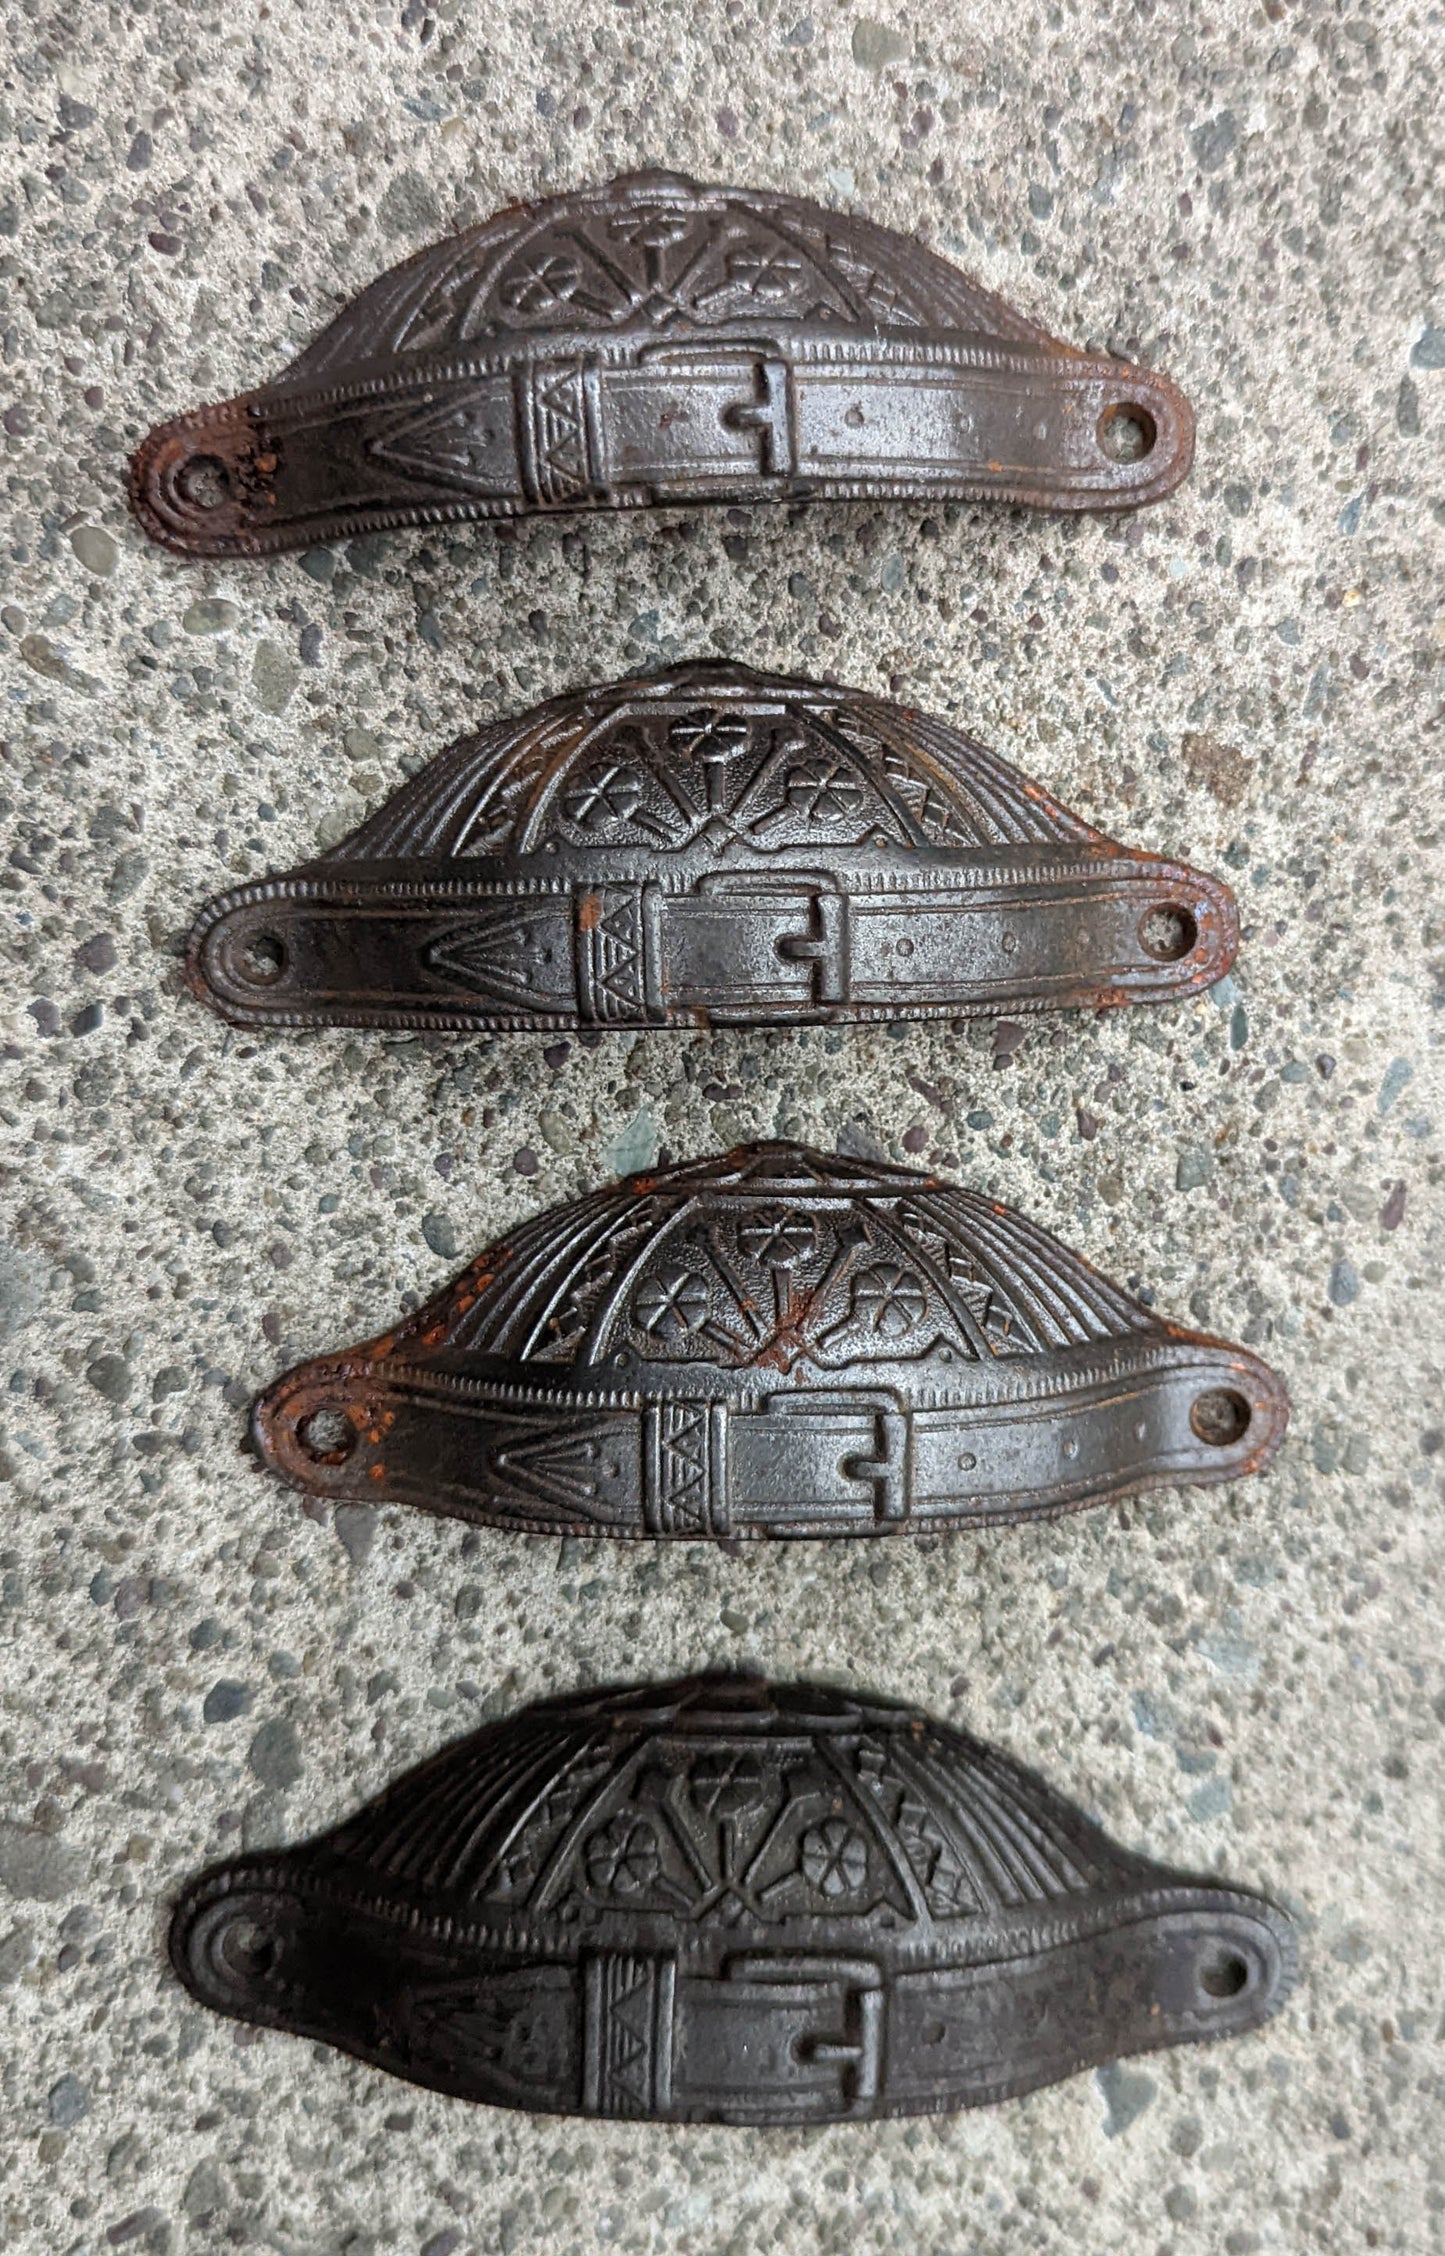 Lot of 4 Antique Vintage Old "Russell & Erwin" SOLID Cast Iron Steel Dresser Desk Drawer Bin Furniture Pull Handle Eastlake Aesthetic Victorian Style